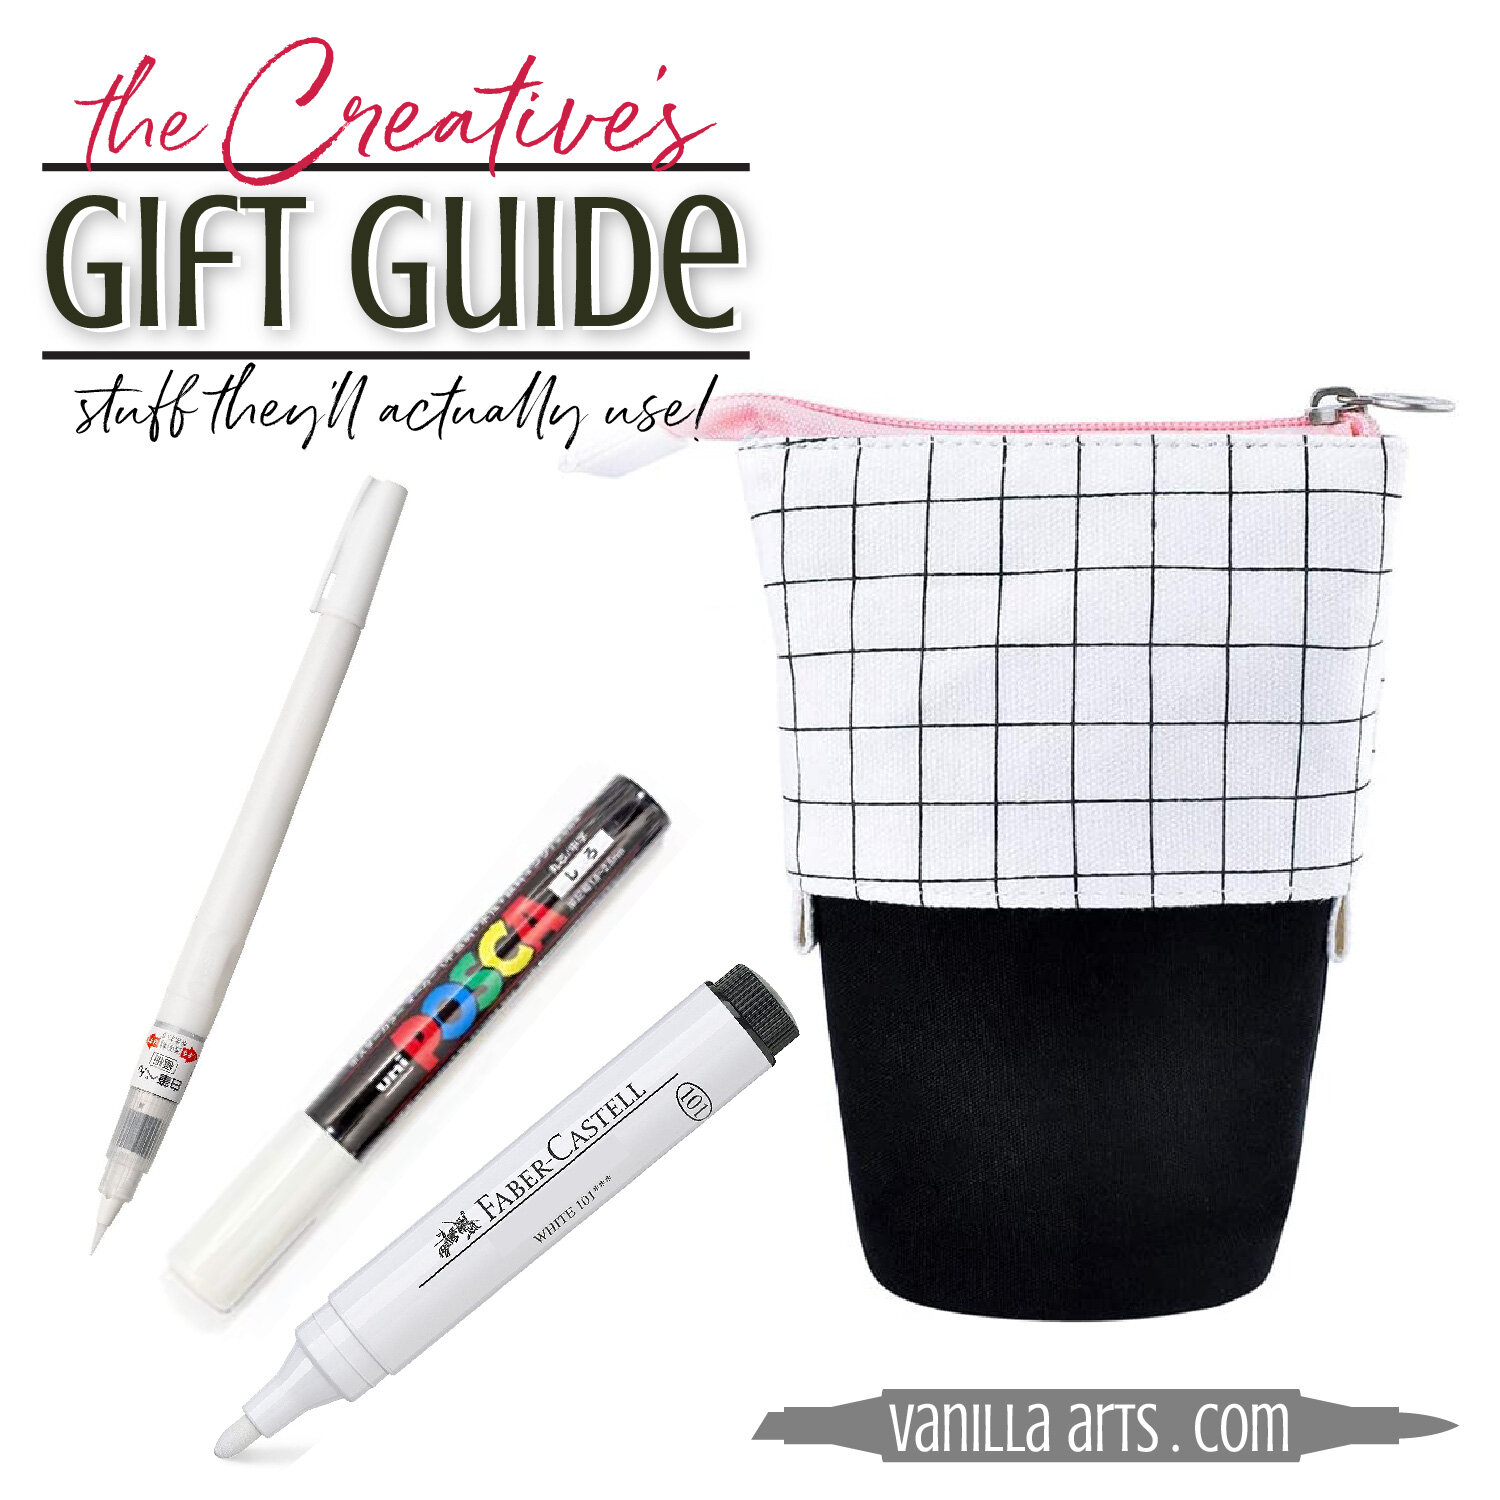 Markers: A Buying Guide for Beginners and Artists! — Art is Fun